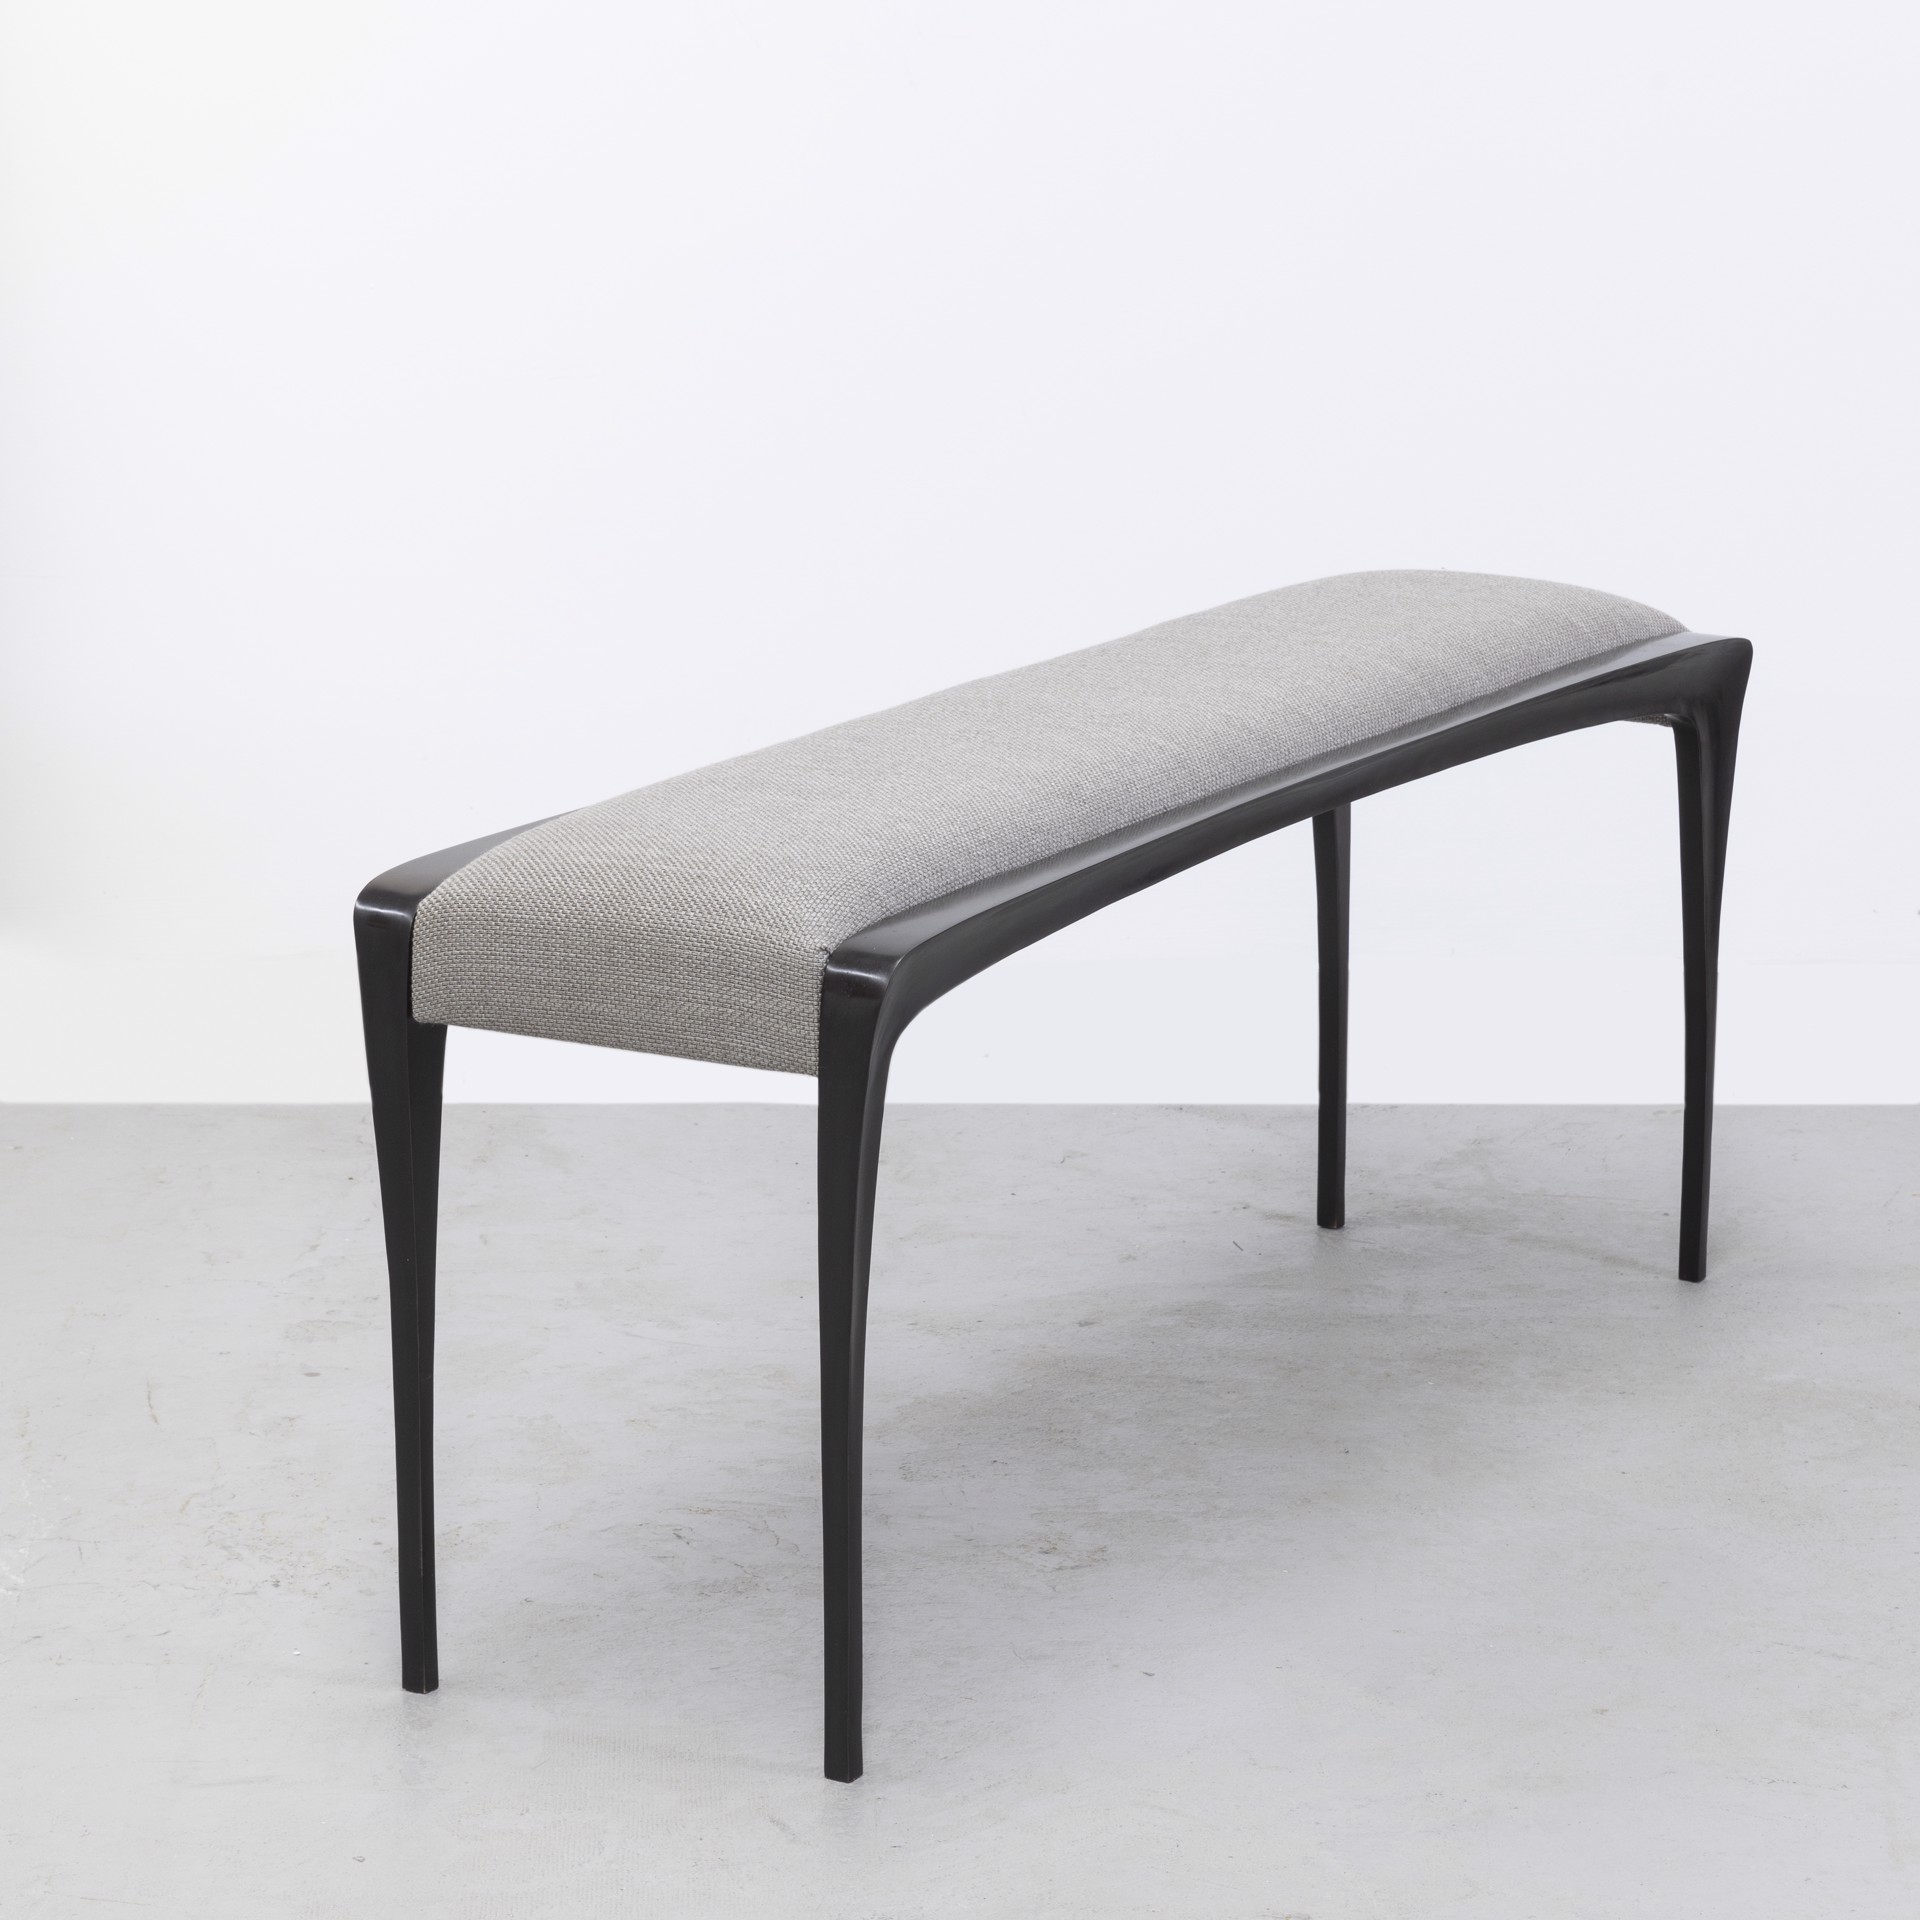 Bronze bench by Anasthasia Millot